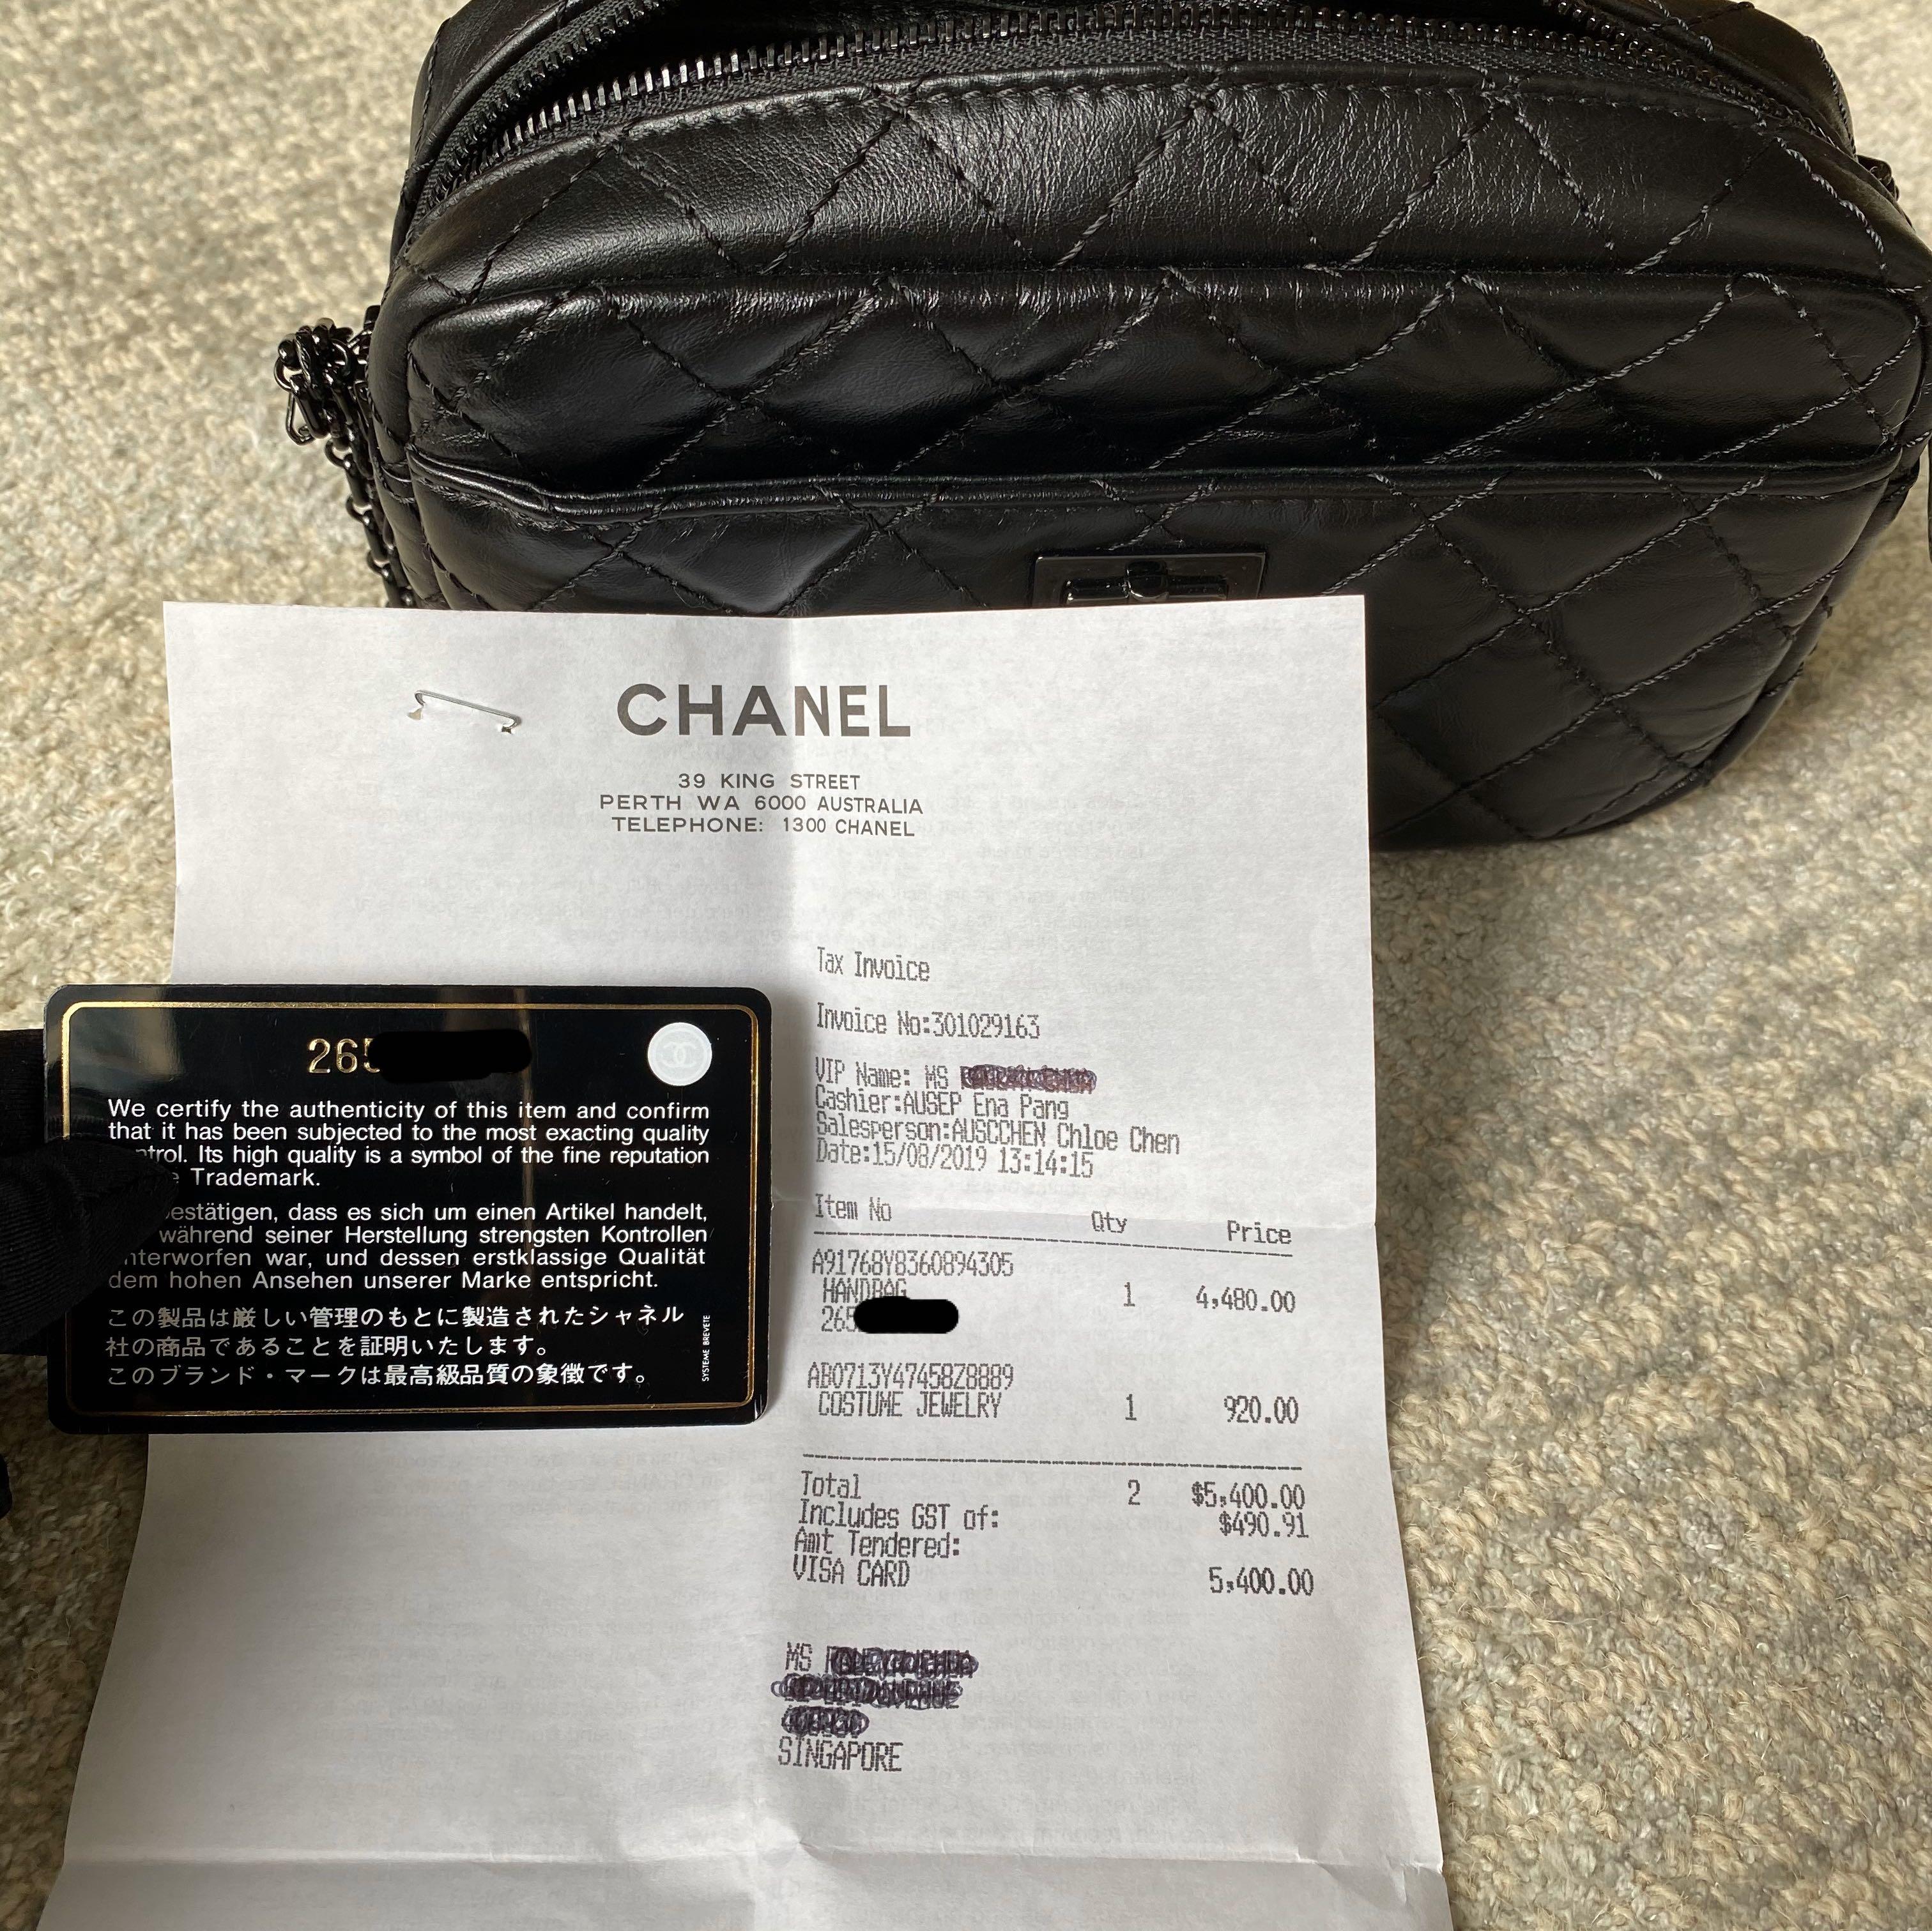 Chanel Black Leather Small Reissue Camera Bag